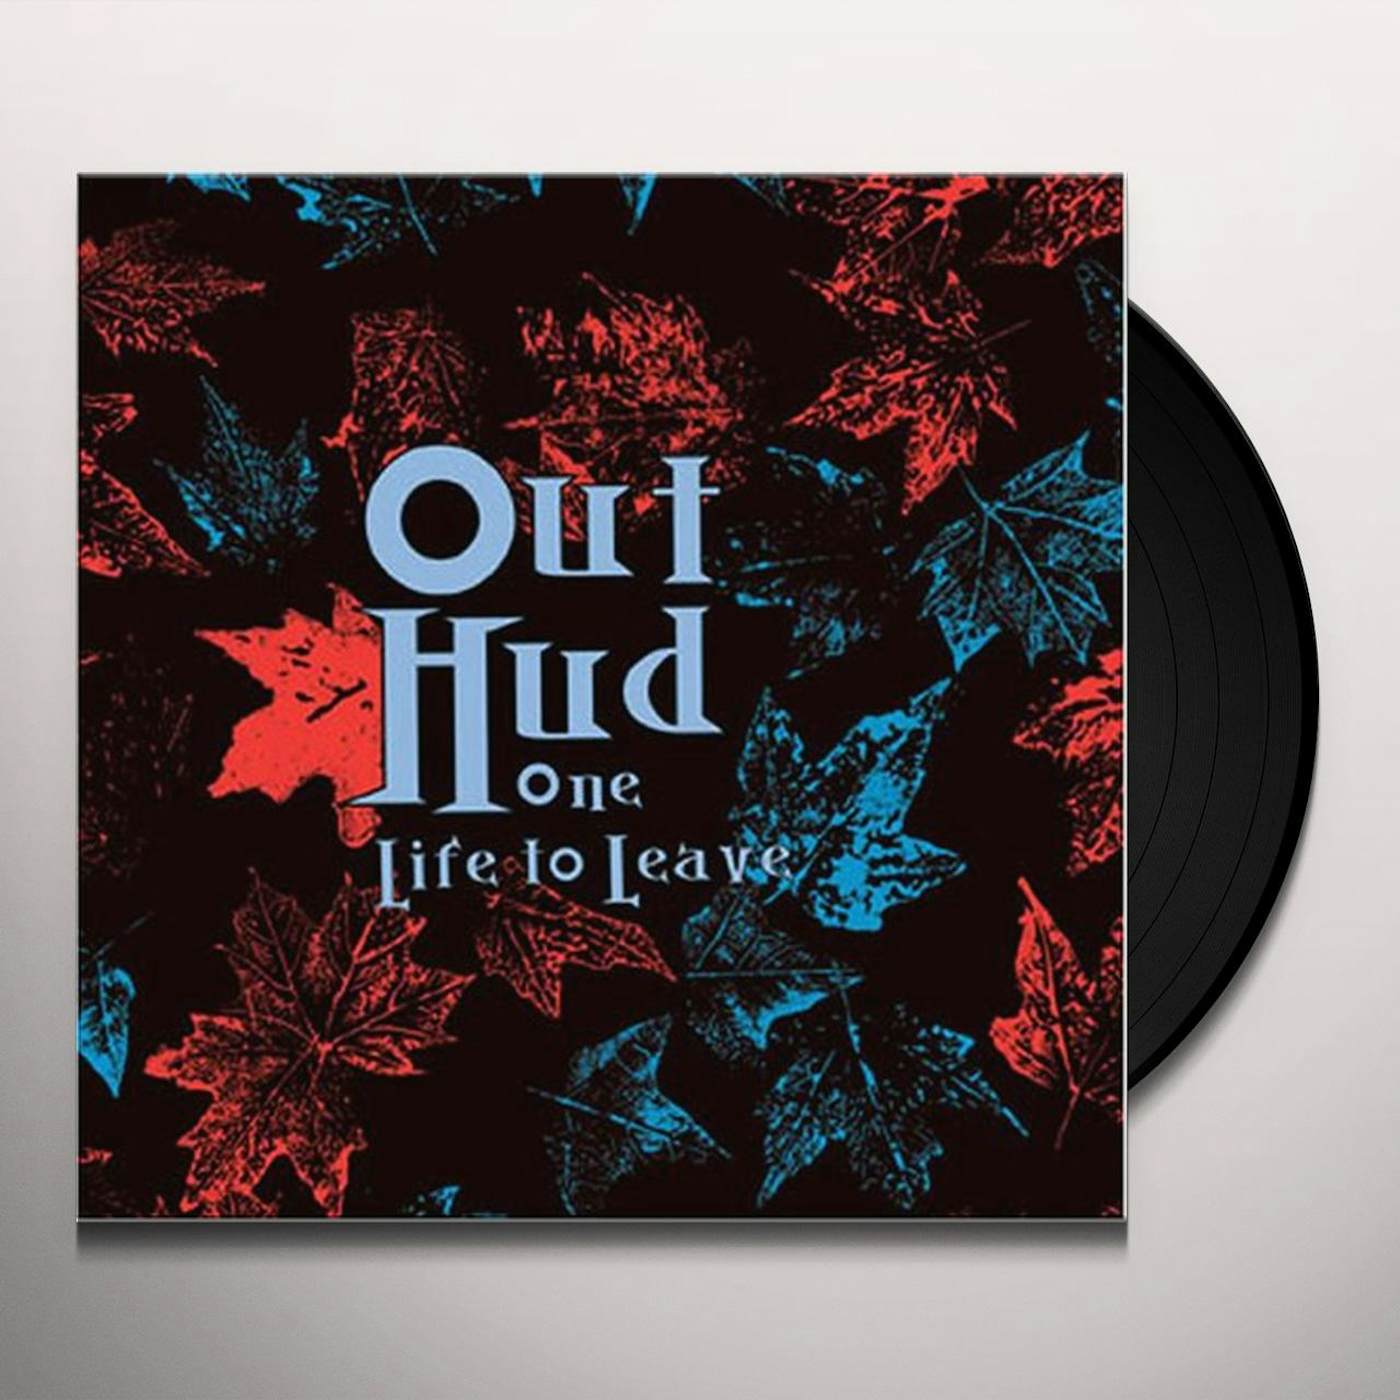 Out Hud One Life to Leave Vinyl Record